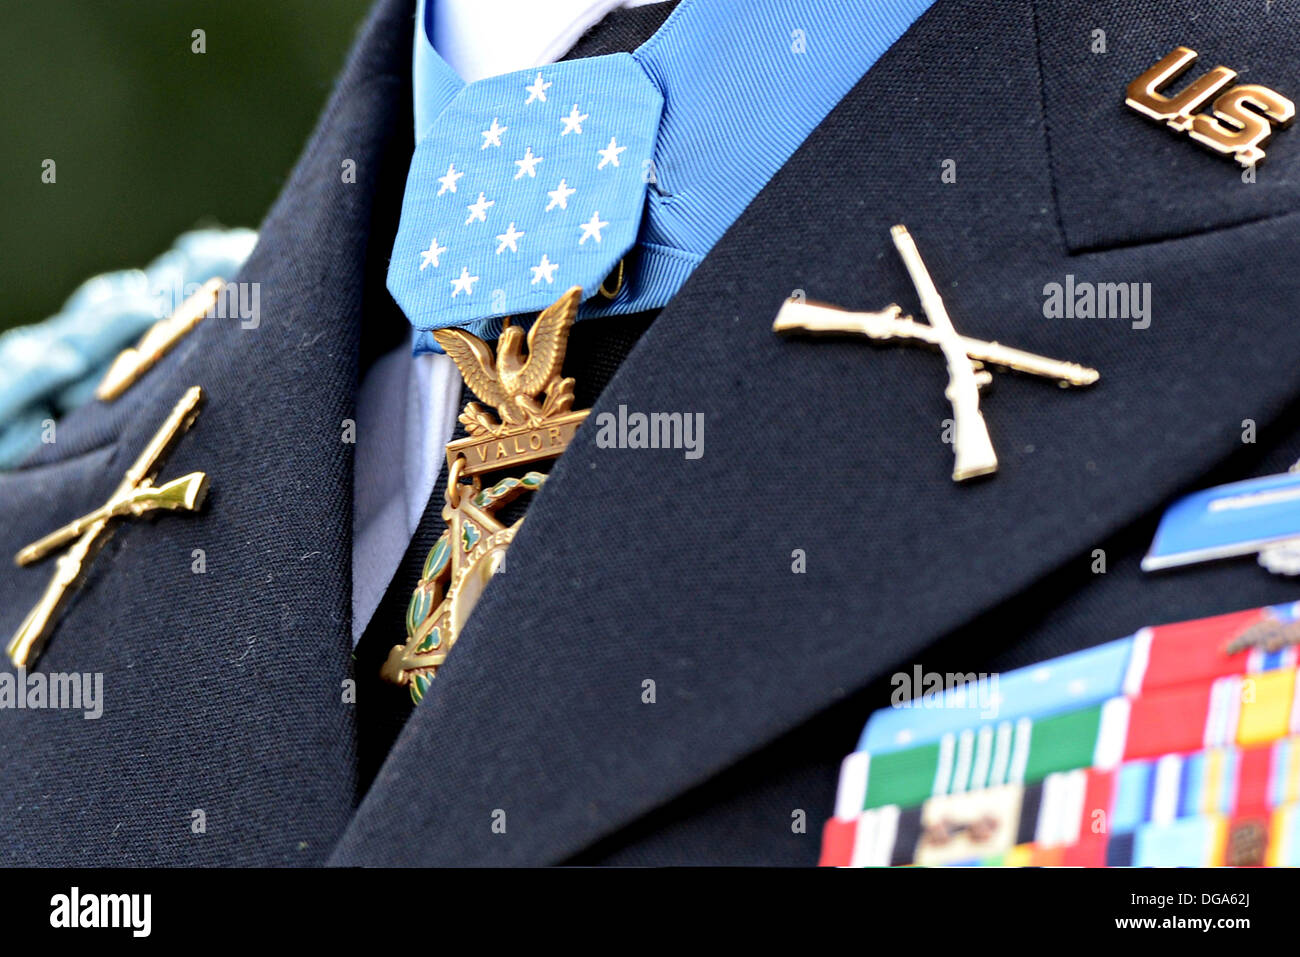 The Medal of Honor hangs from the neck of former US Army Capt. William D. Swenson as speaks to the media outside the White House after he was presented with the Medal of Honor by President Barack Obama October 15, 2013 in Washington, DC. The Medal of Honor is the nation's highest military honor. Stock Photo